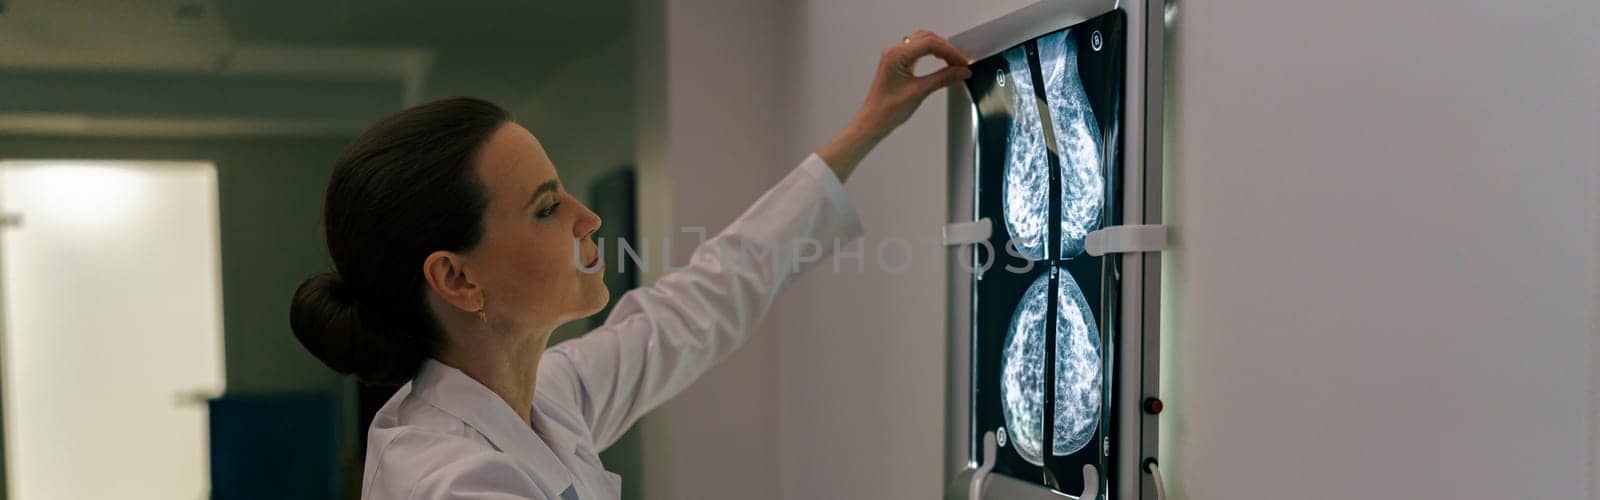 Focused professional doctor radiologist analyzing scan MRI images in medical center by Yaroslav_astakhov